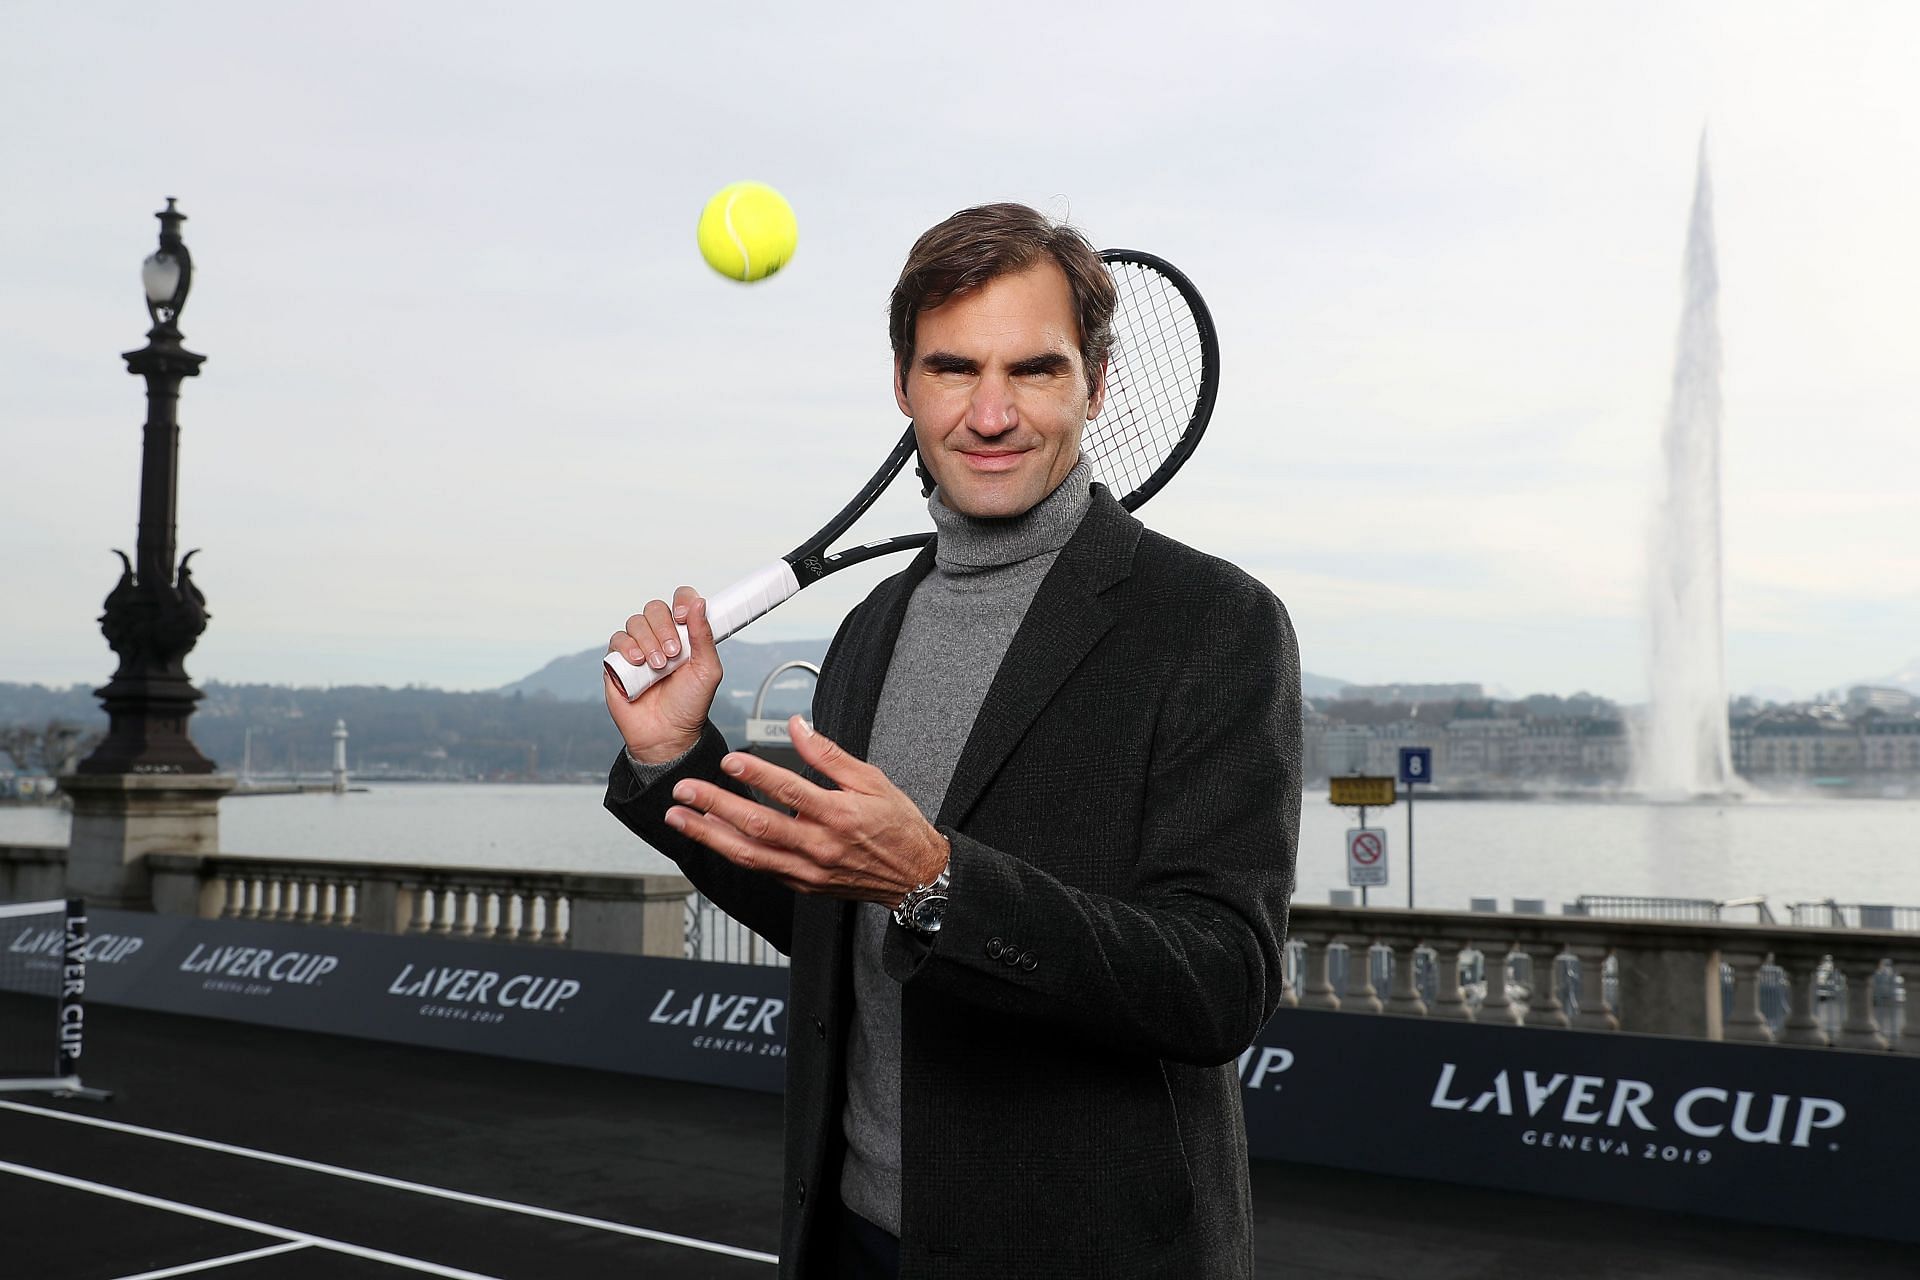 Roger Federer at the Laver Cup Press Conference